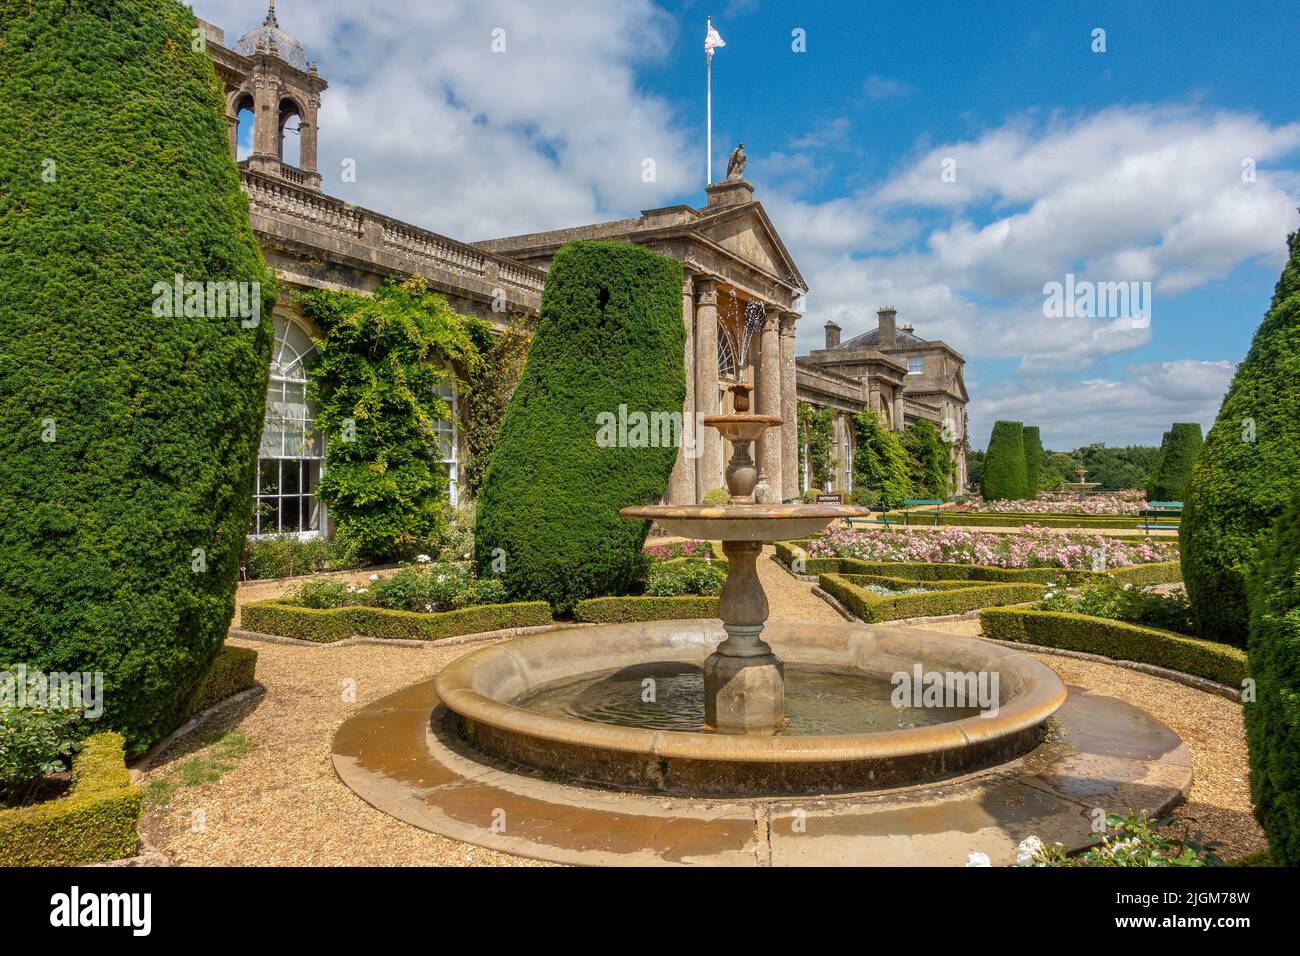 Bowood House,formal.Gardens,Fountain,Wiltshire,Royaume-Uni Banque D'Images